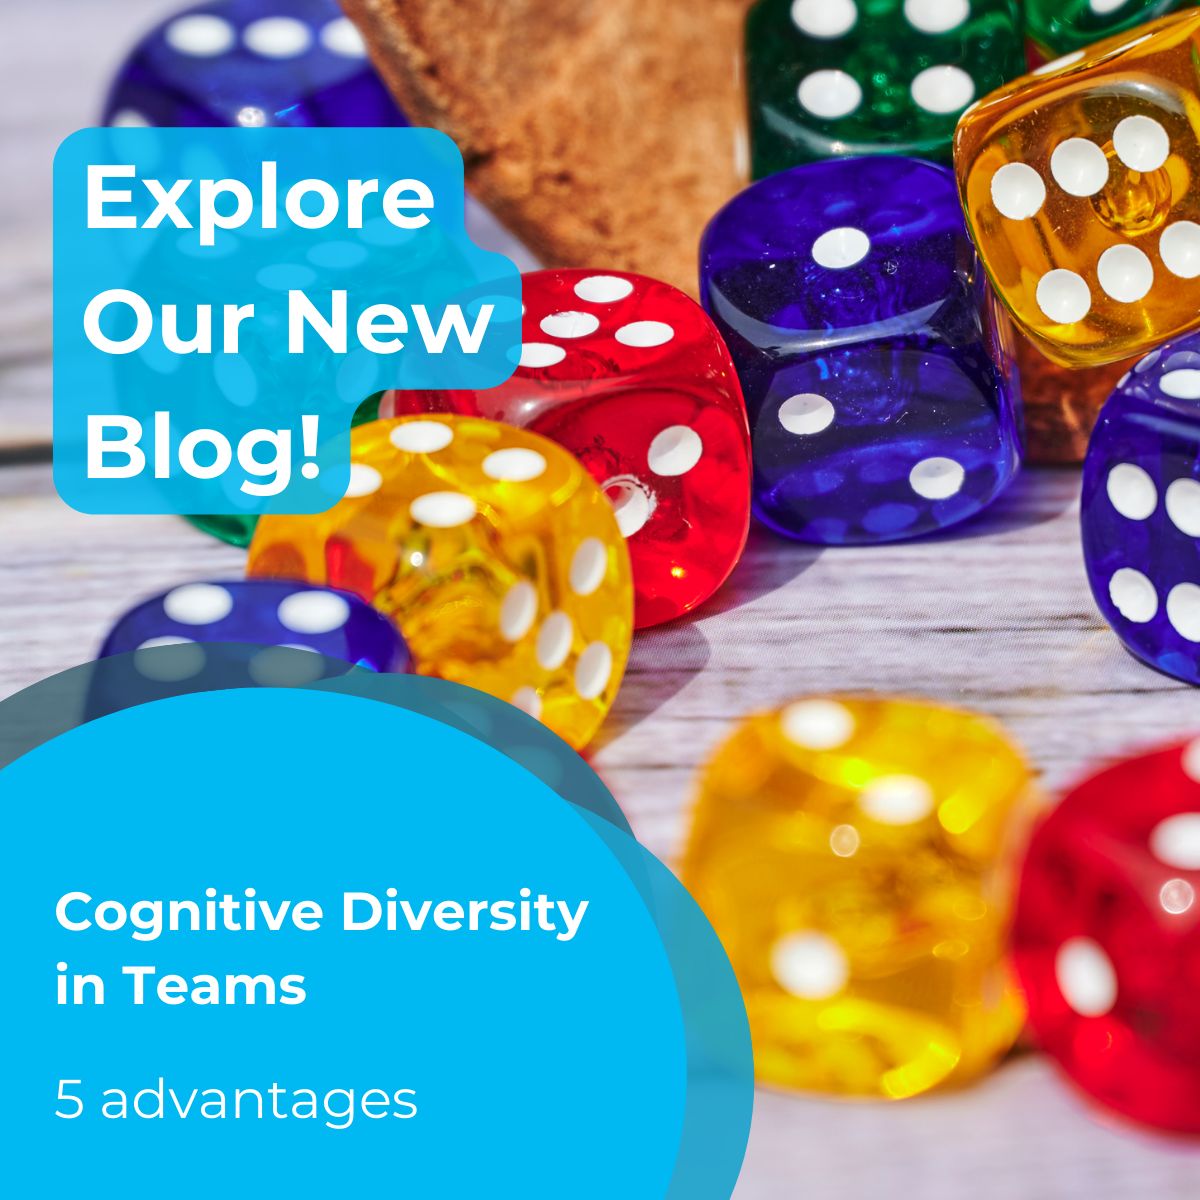 * #NewBlogAlert * 🤩

We're exploring 5 advantages to Cognitive Diversity in Teams.

#CognitiveDiversity refers to the different ways that individuals perceive, think and process information...creating stronger, more #innovative and #cohesive teams.

buff.ly/3uD7IrU